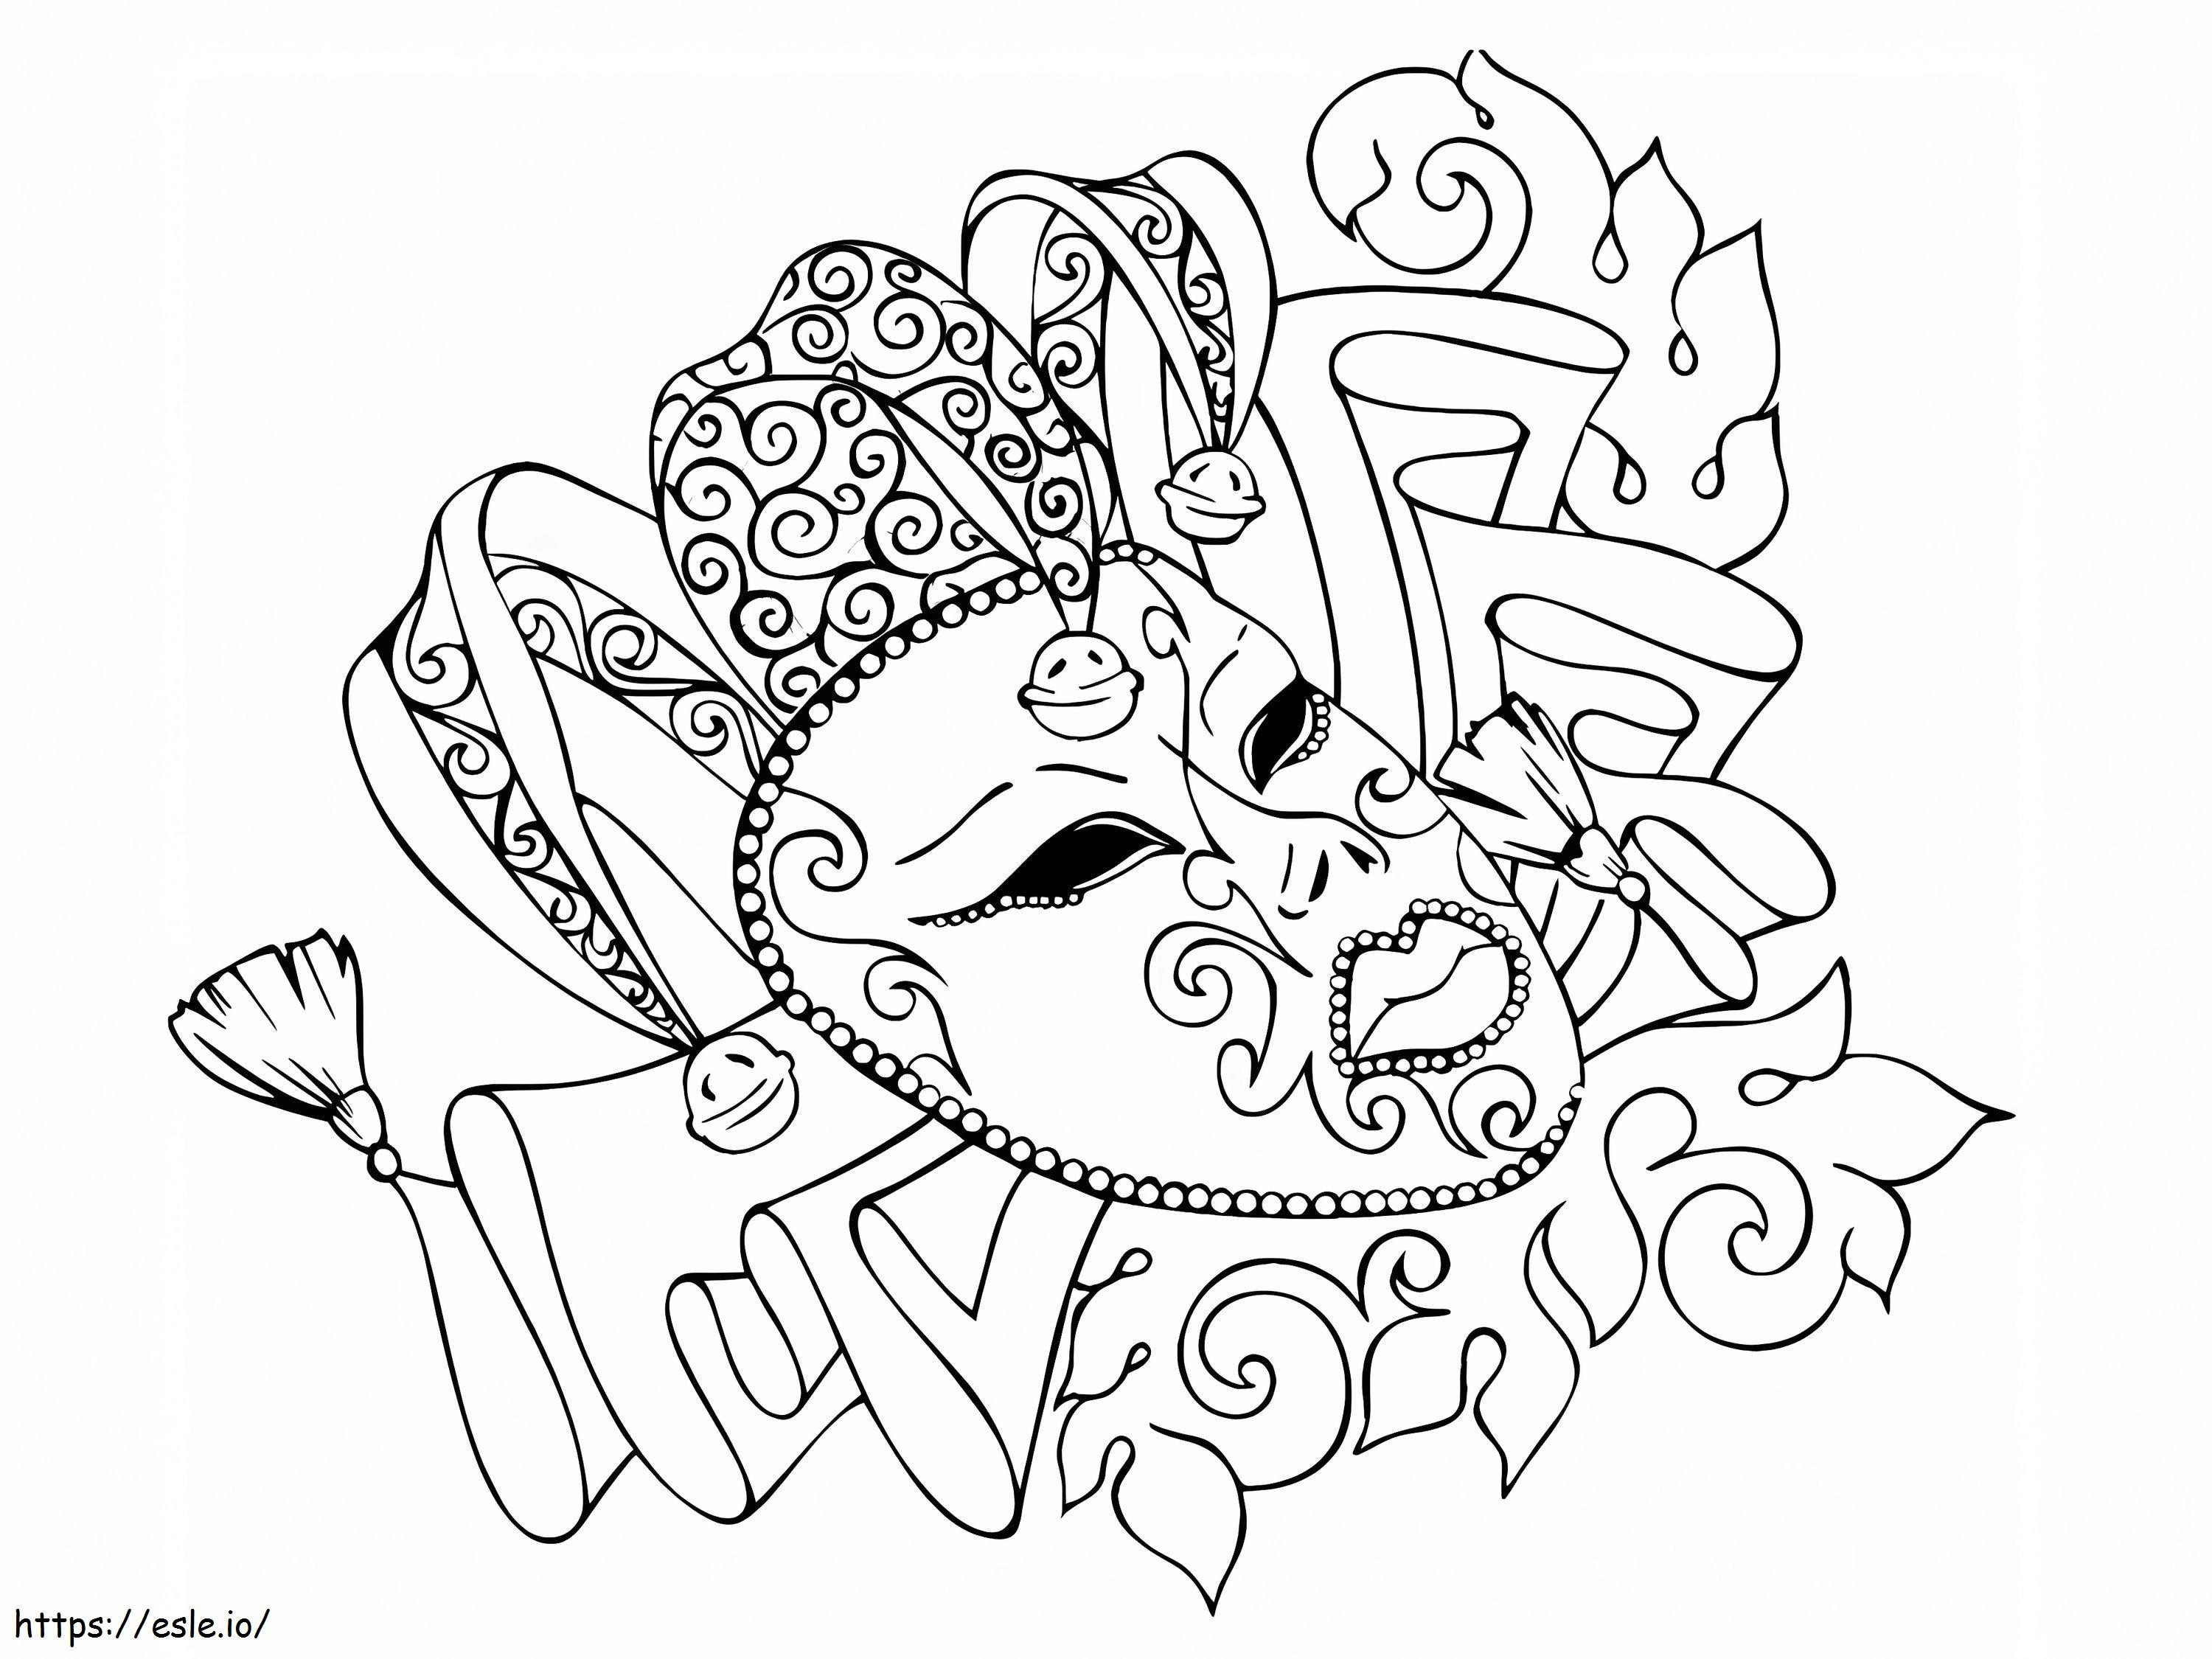 Carnival Printable coloring page